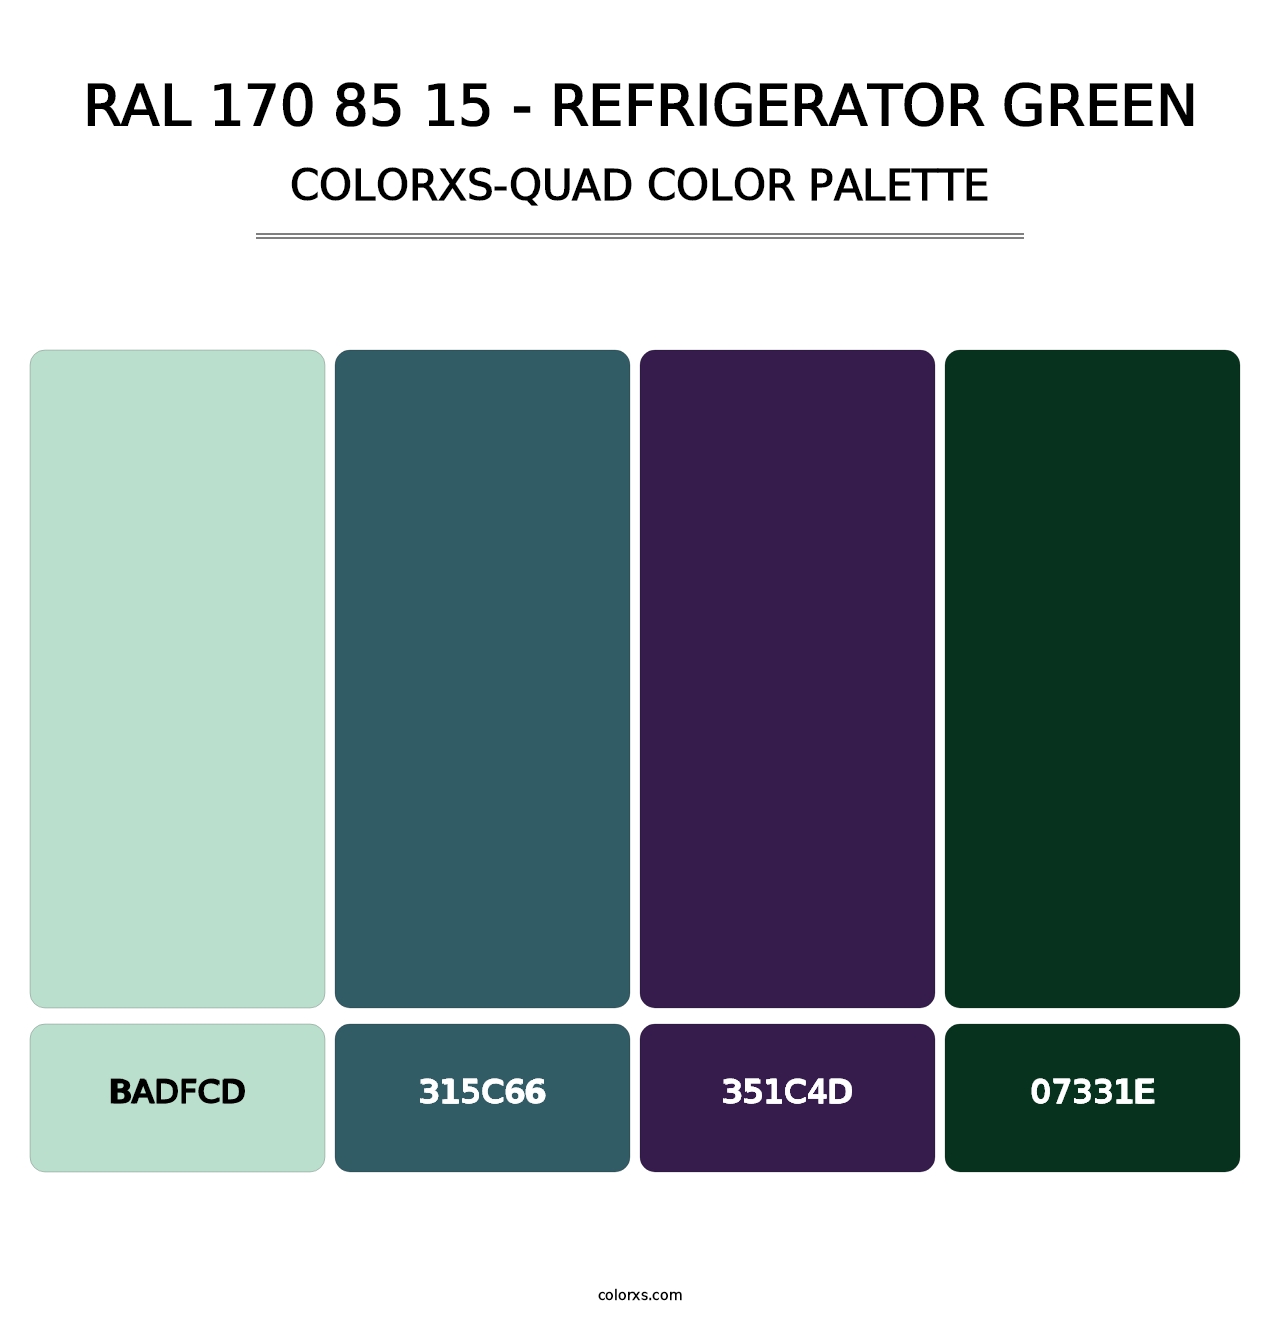 RAL 170 85 15 - Refrigerator Green - Colorxs Quad Palette